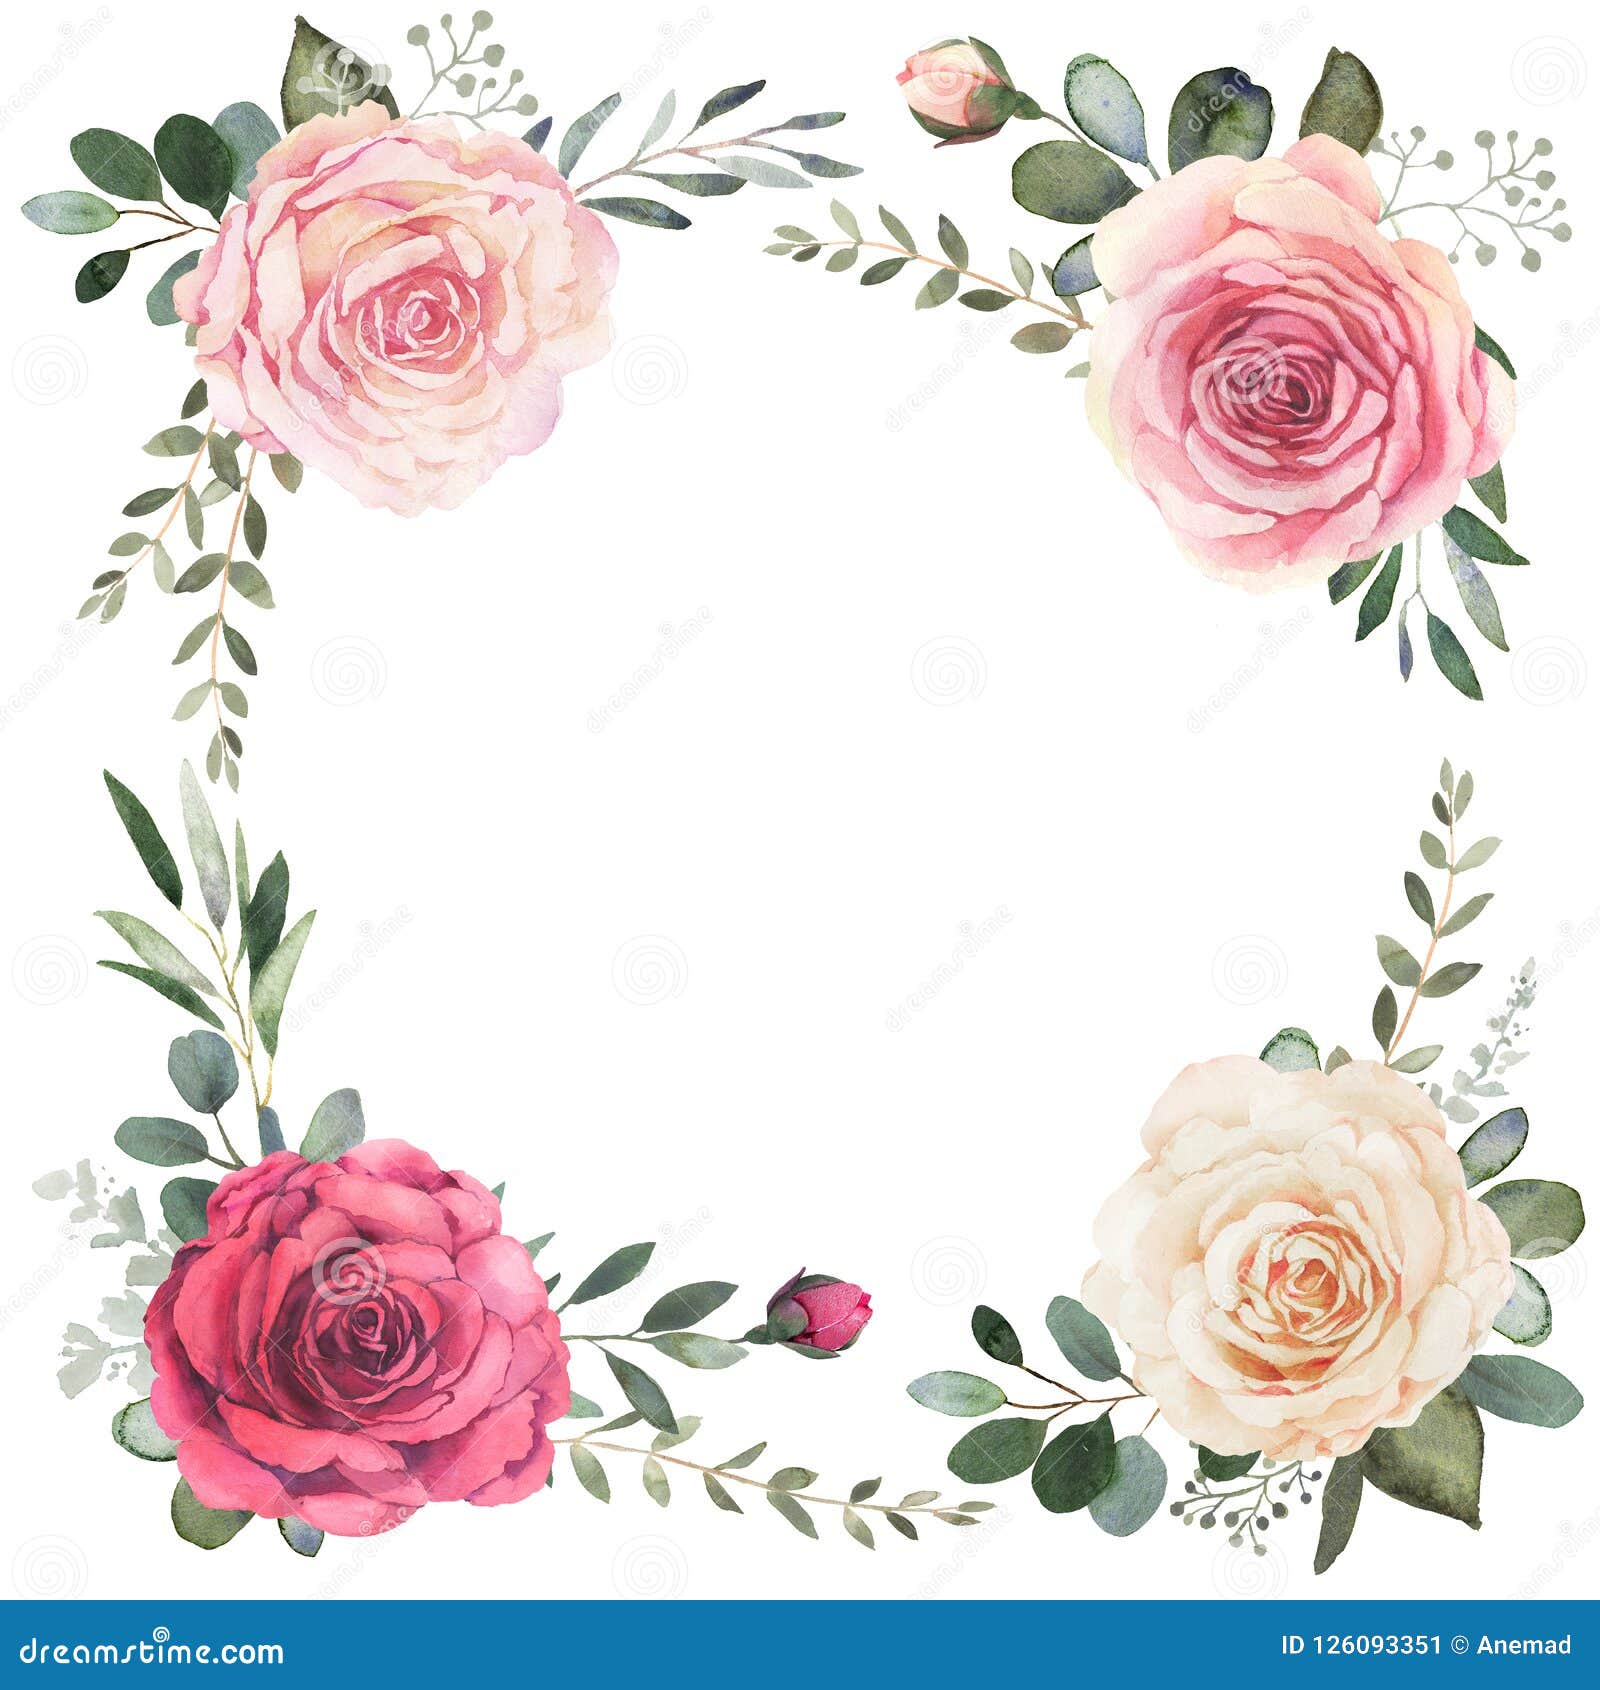 Watercolor Floral Wreath with Roses and Eucalyptus Stock Illustration ...